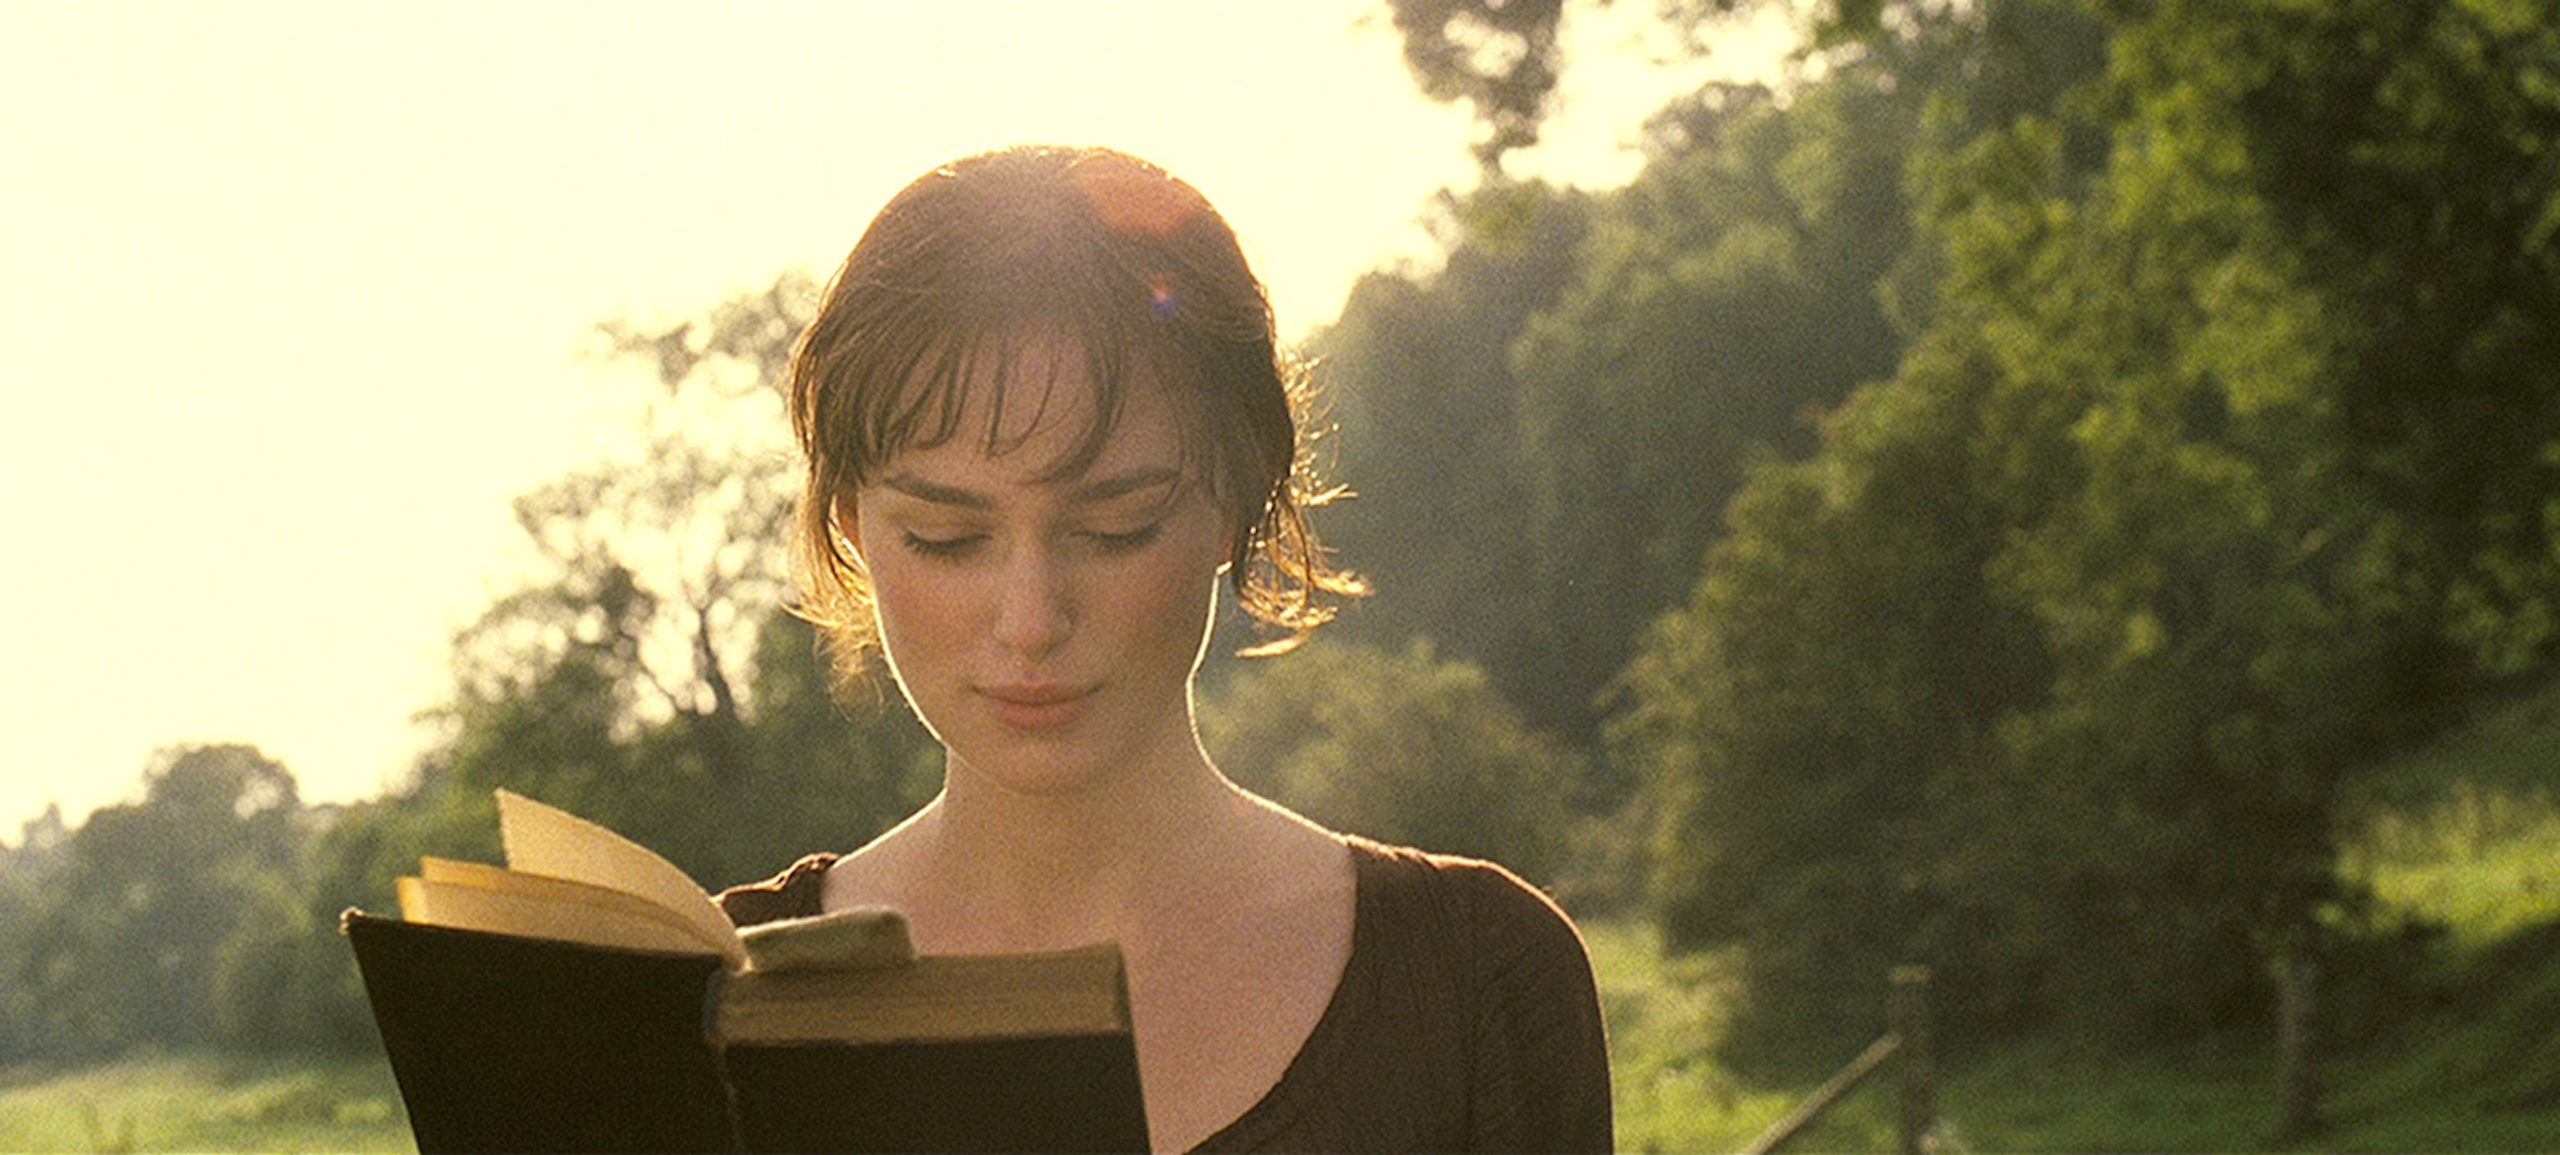 Elizabeth Bennet is reading a book while on a walk with the sun giving her a warm glow. 